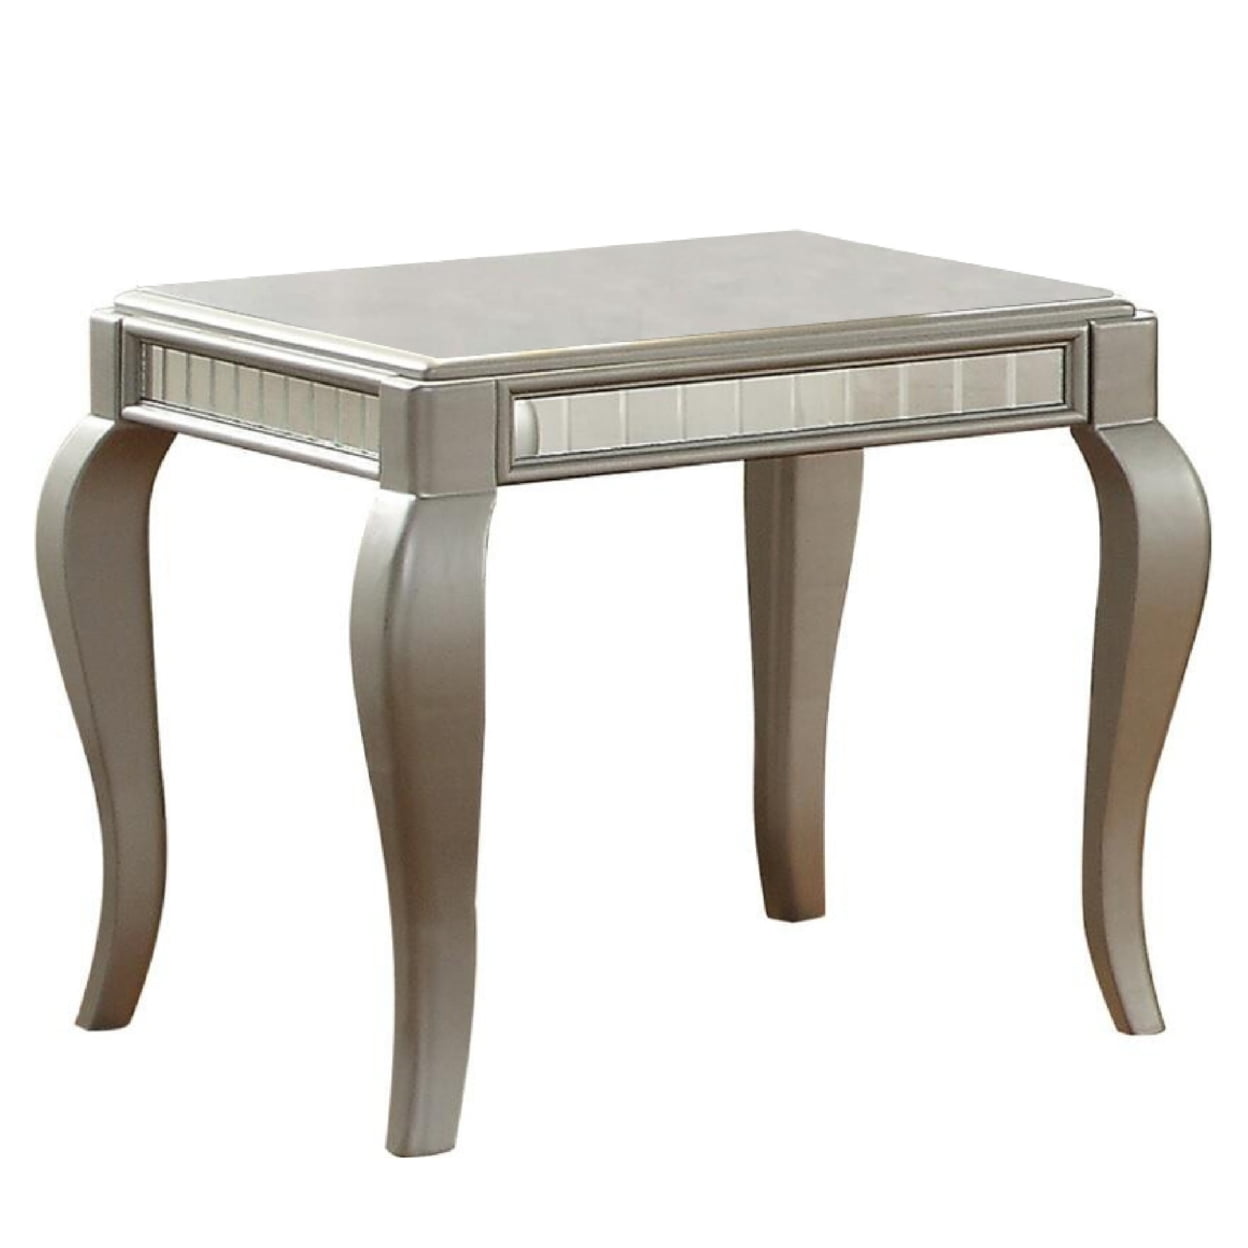 Picture of ACME 83082 Francesca End Table, Champagne - 24 x 25 x 25 in.